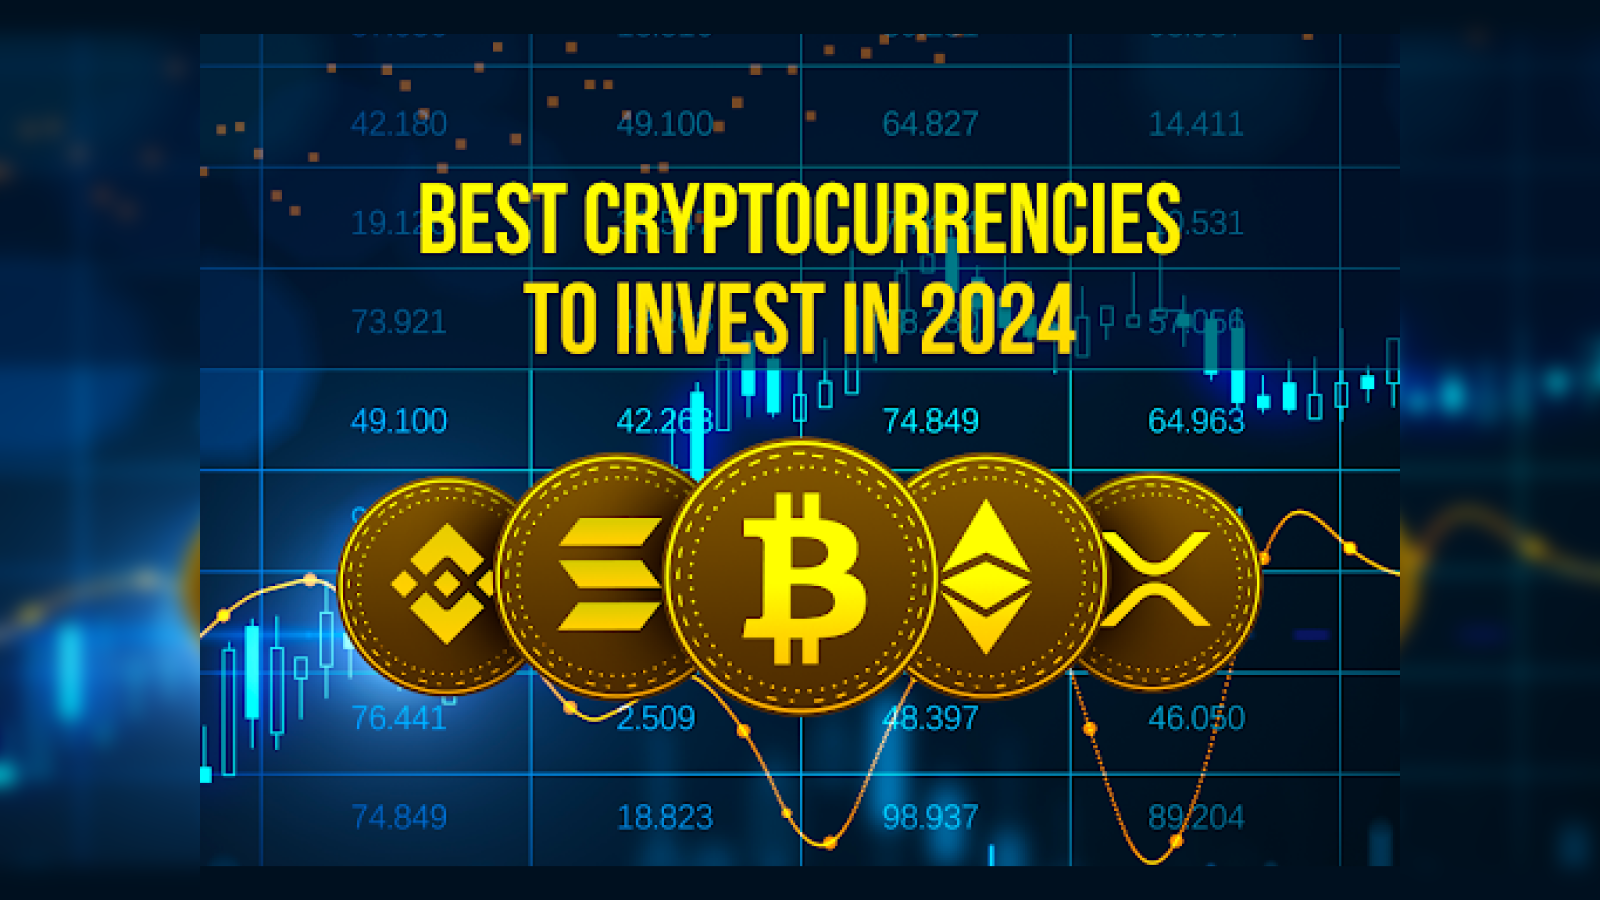 Best Cryptocurrency to Invest in - The Complete Guide